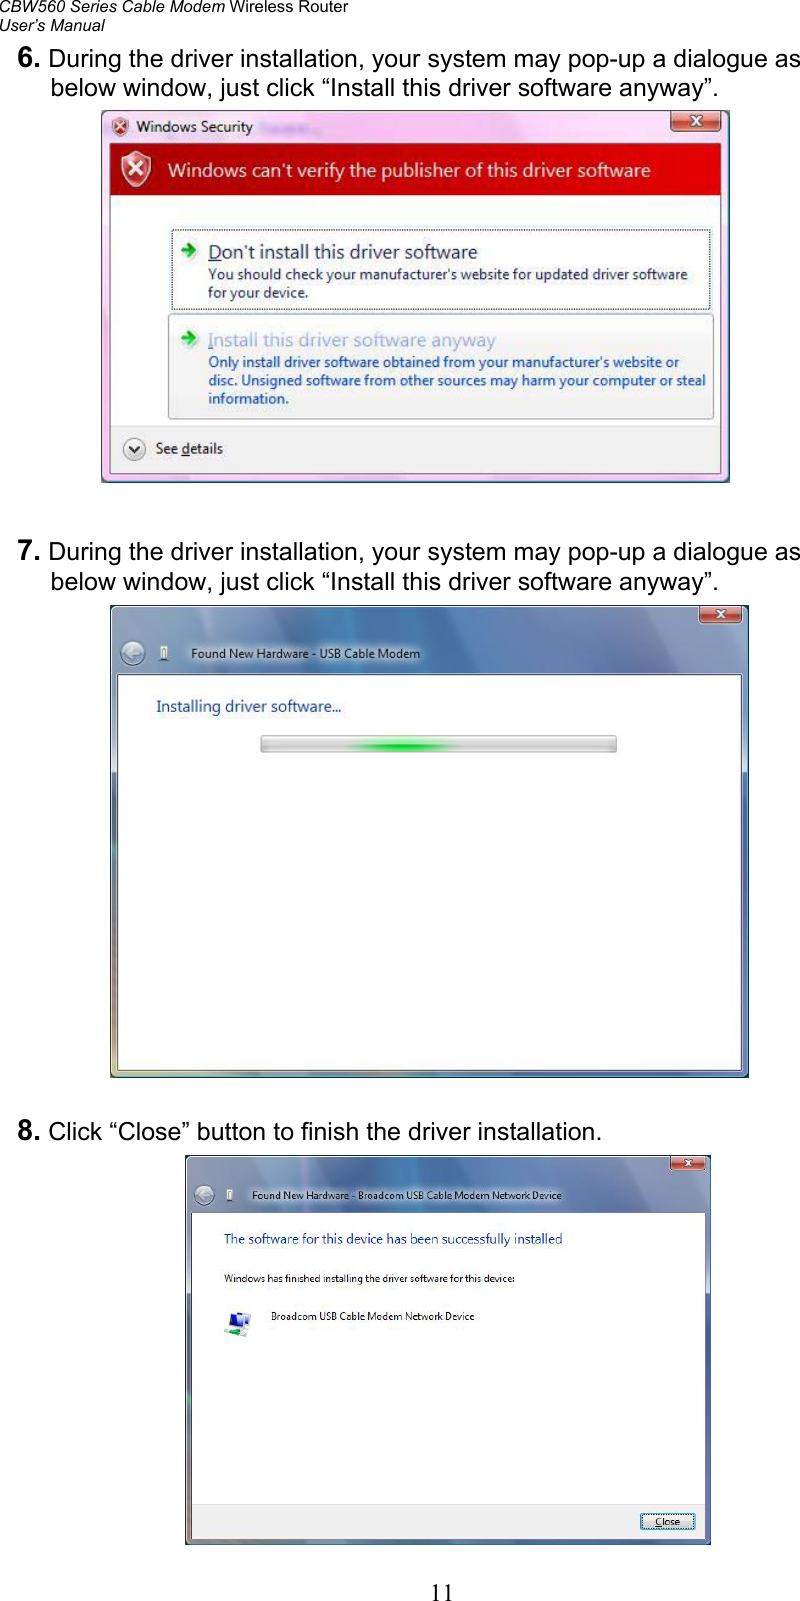 CBW560 Series Cable Modem Wireless Router User’s Manual   116. During the driver installation, your system may pop-up a dialogue as below window, just click “Install this driver software anyway”.                7. During the driver installation, your system may pop-up a dialogue as below window, just click “Install this driver software anyway”.                   8. Click “Close” button to finish the driver installation.     